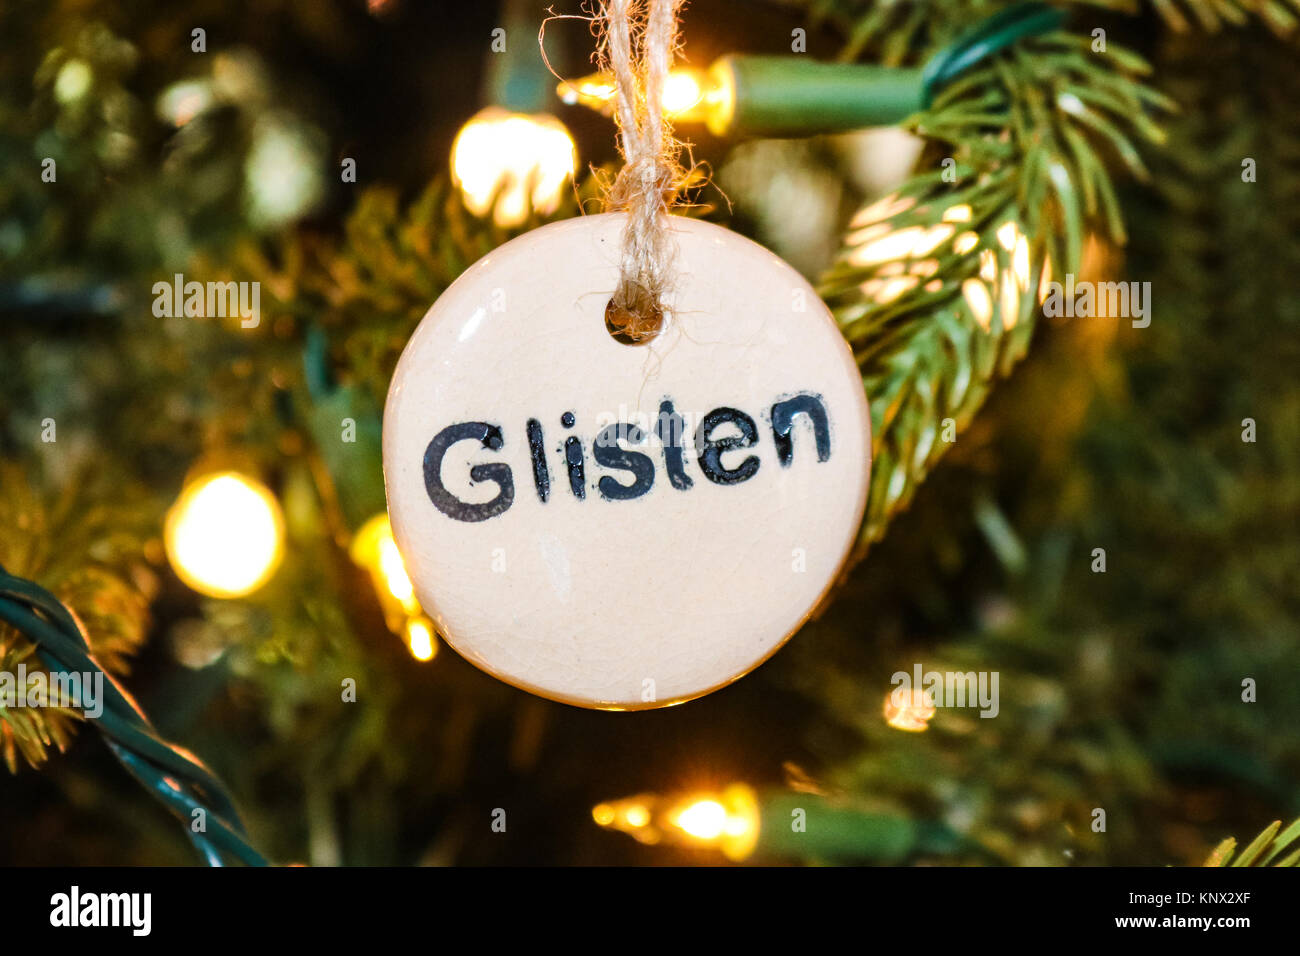 Stamped Glisten Christmas ornament on tree with strings of lights - closeup Stock Photo